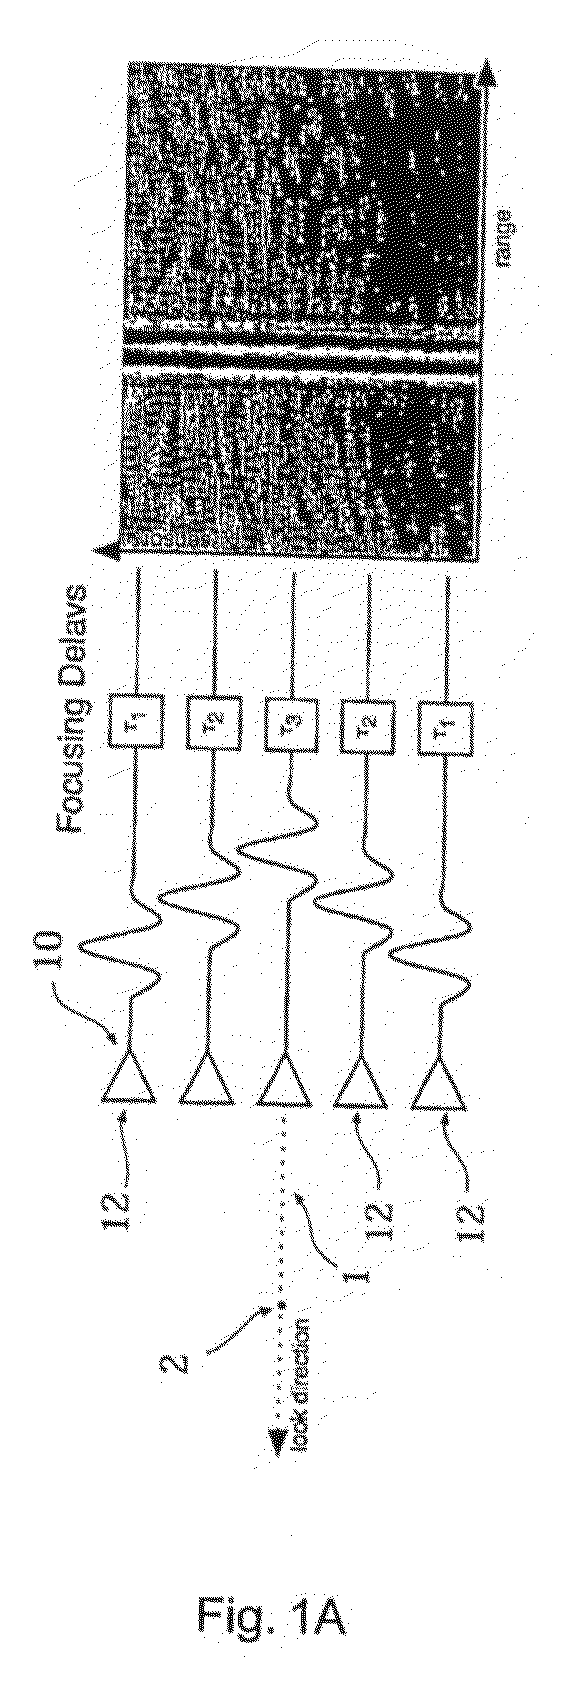 Systems and Method for Adaptive Beamforming for Image Reconstruction and/or Target/Source Localization